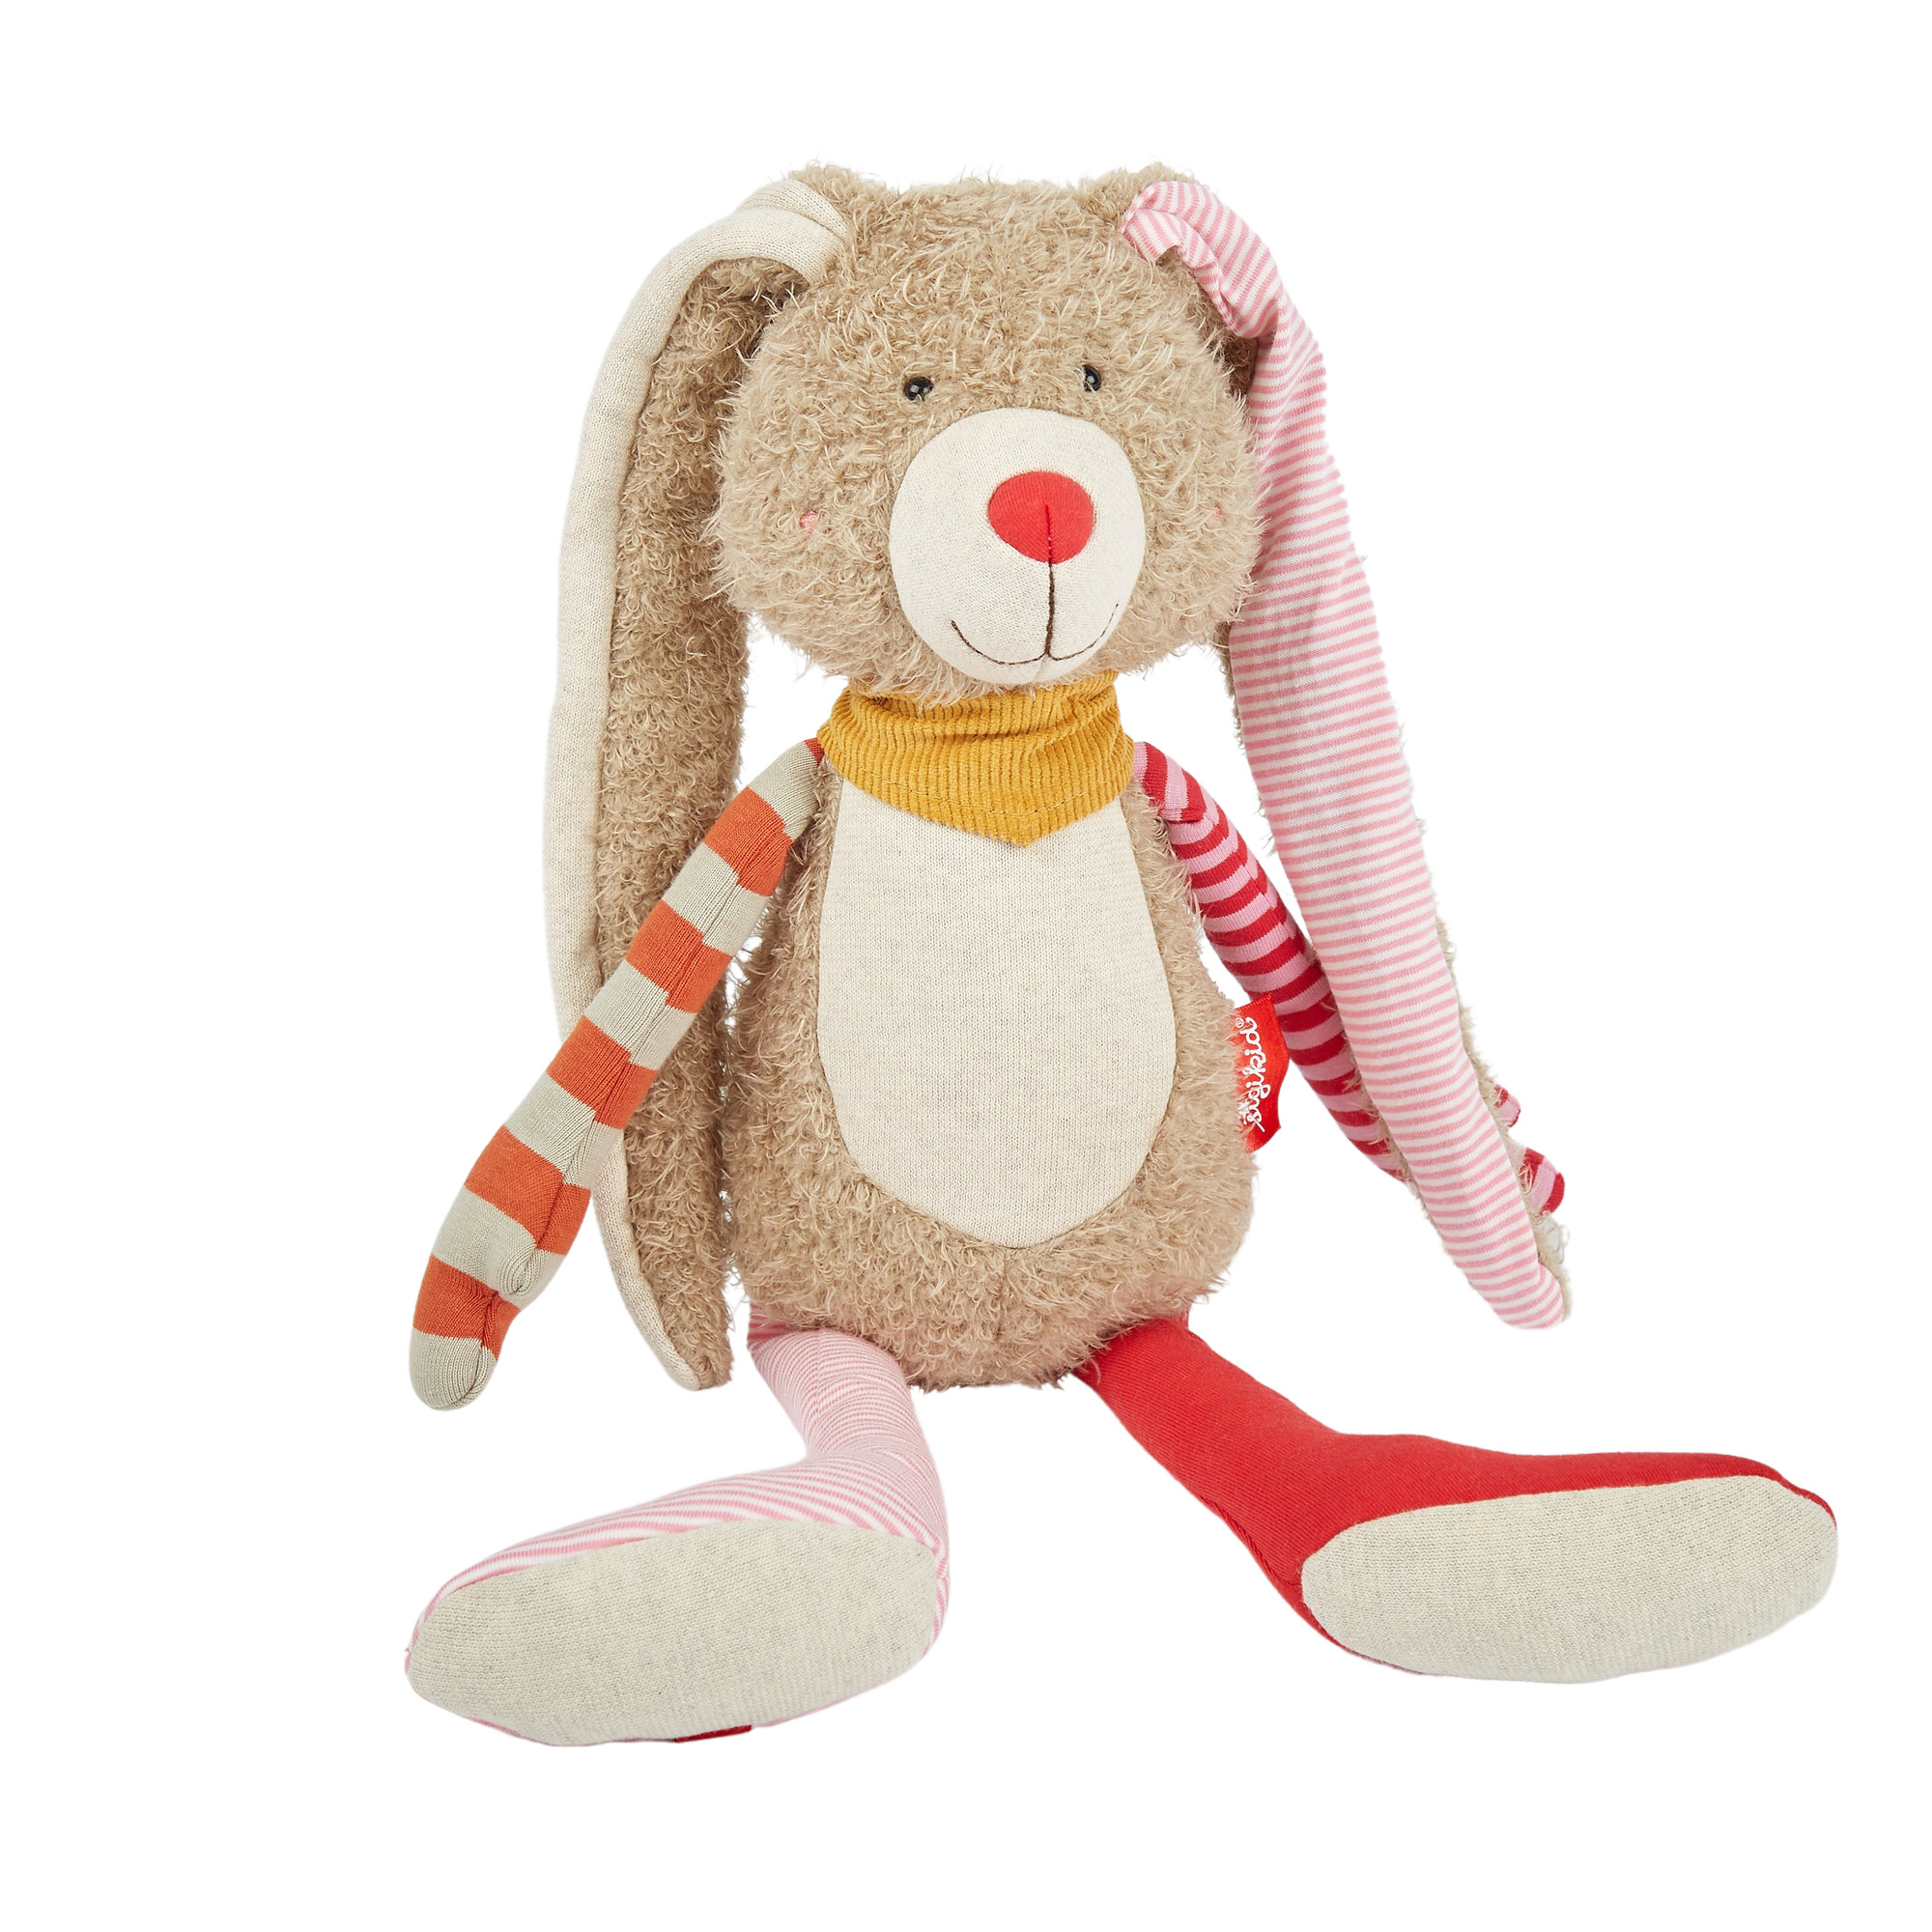 "Long-eared bunny, Patchwork Sweety "